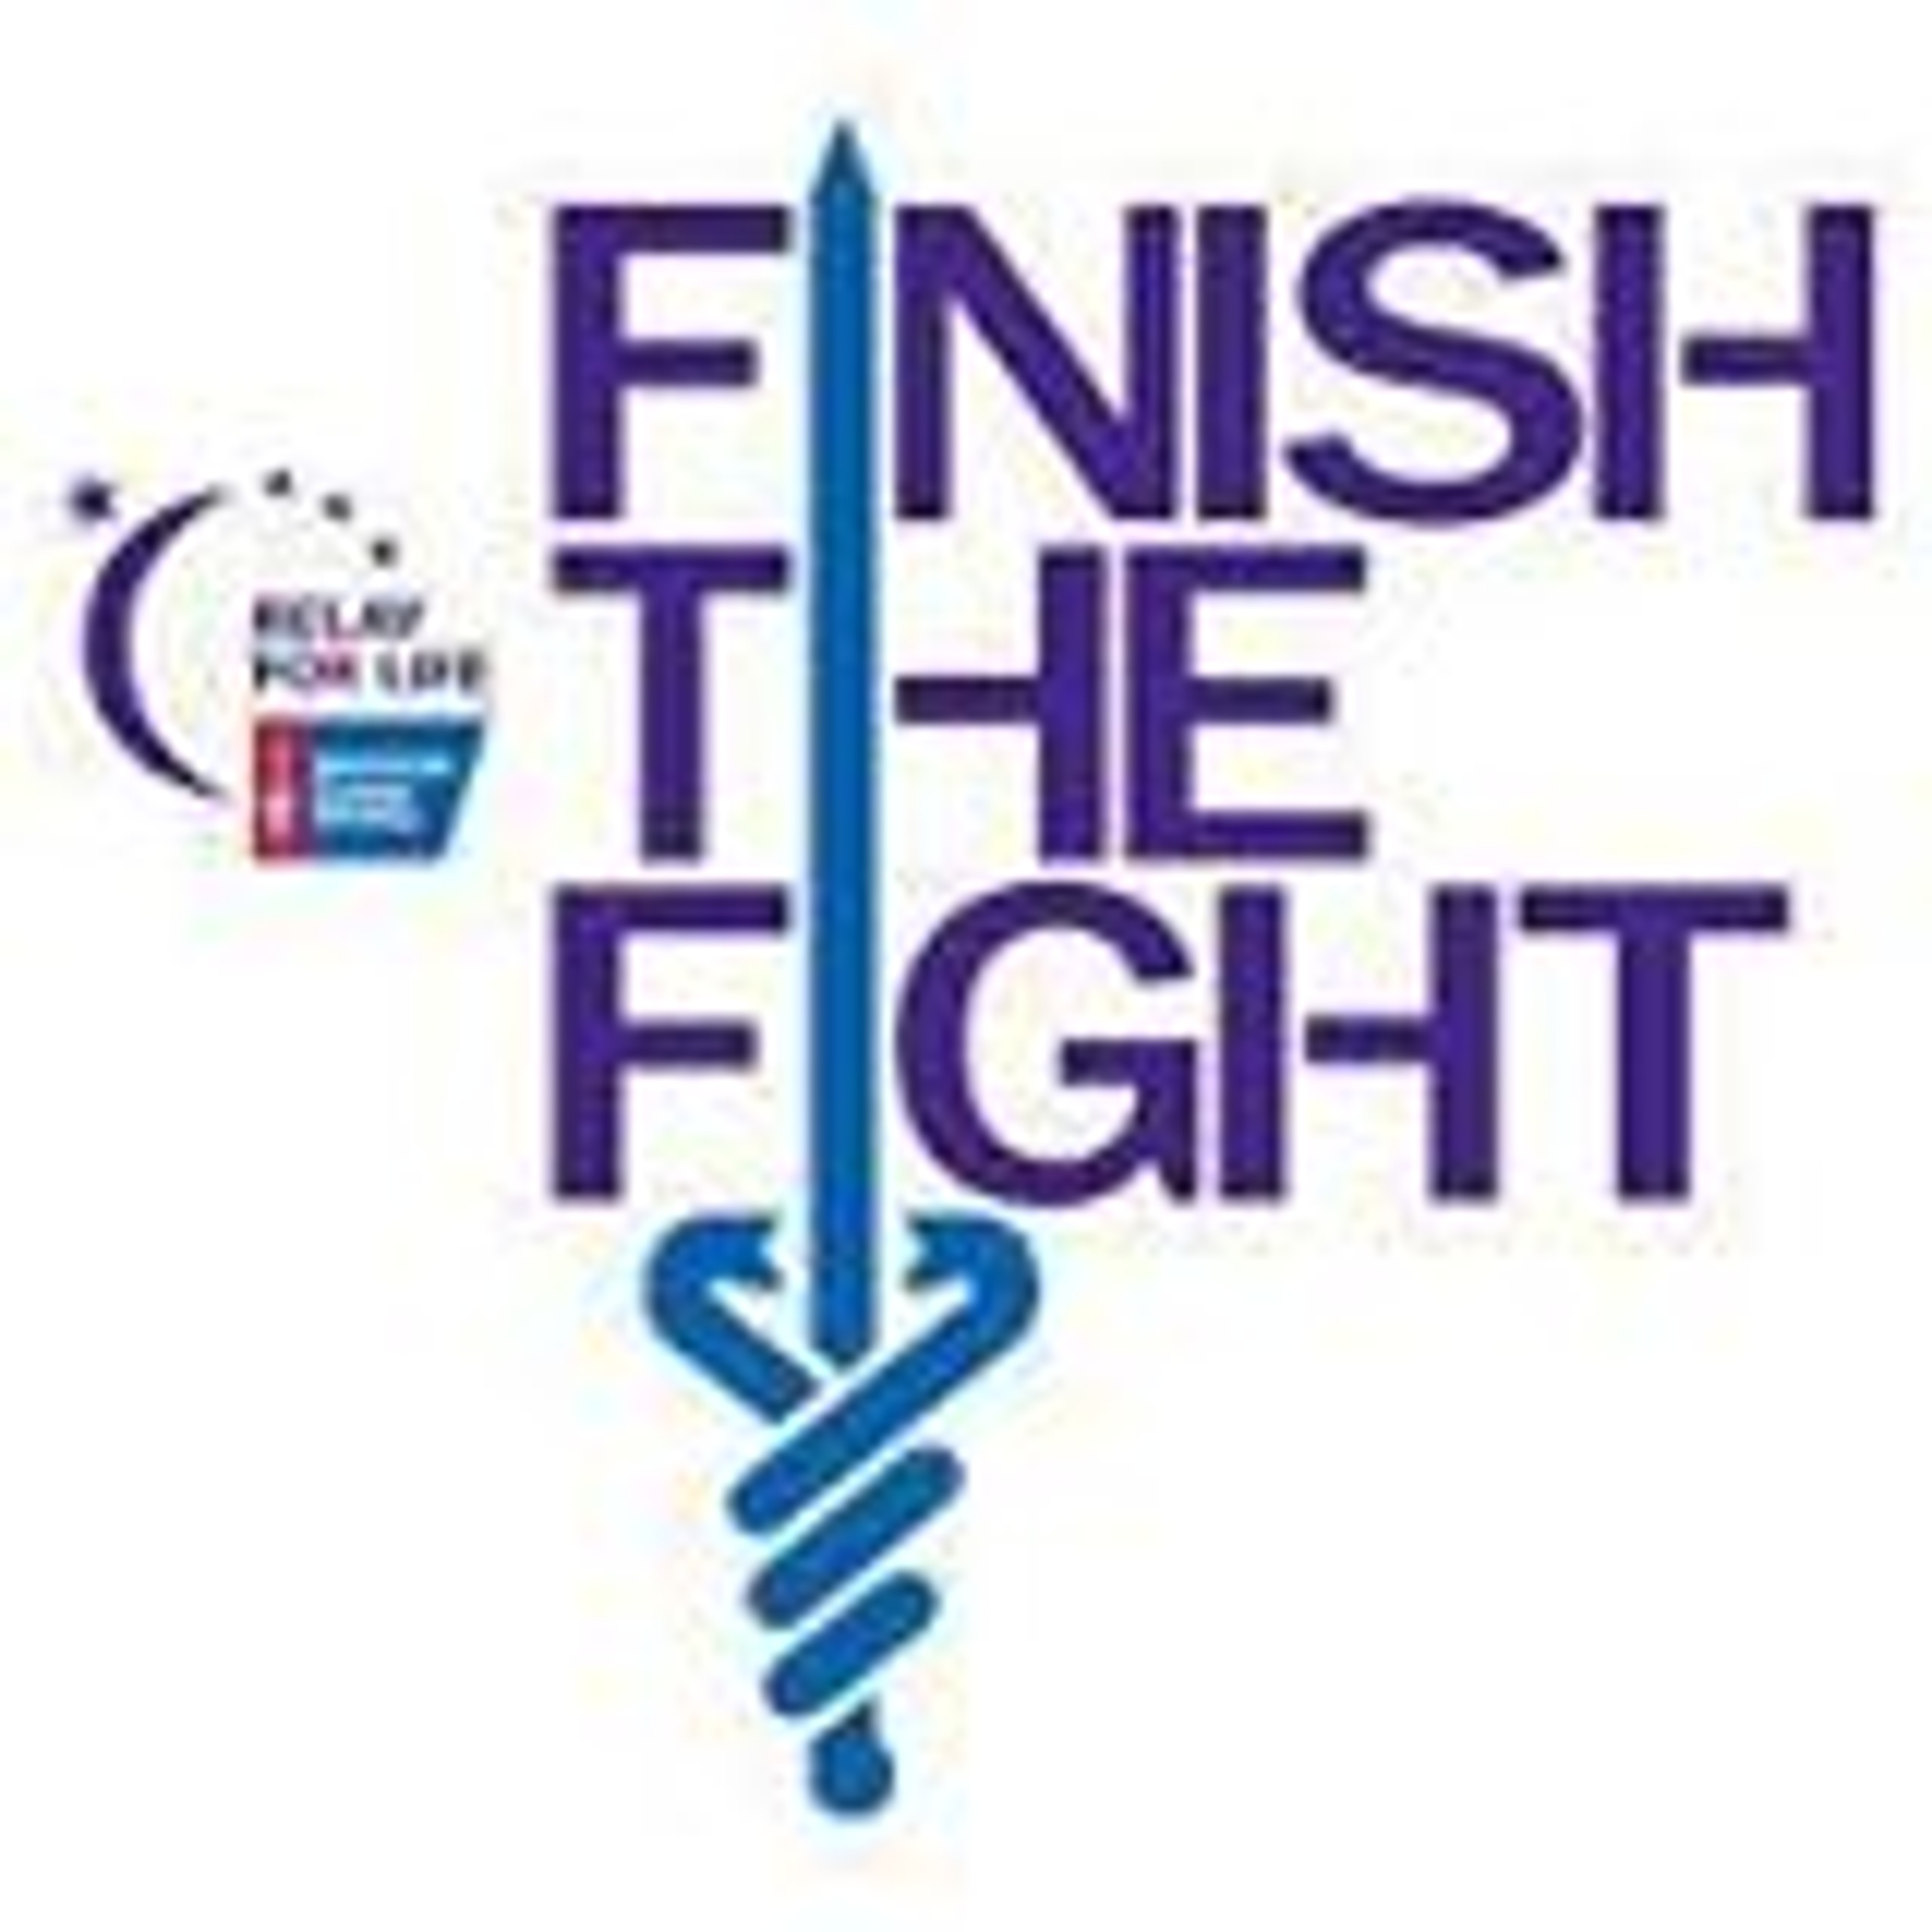 Photographers Needed! The Greater Milford Relay for Life 2014 is looking for you to join team fStop Cancer!